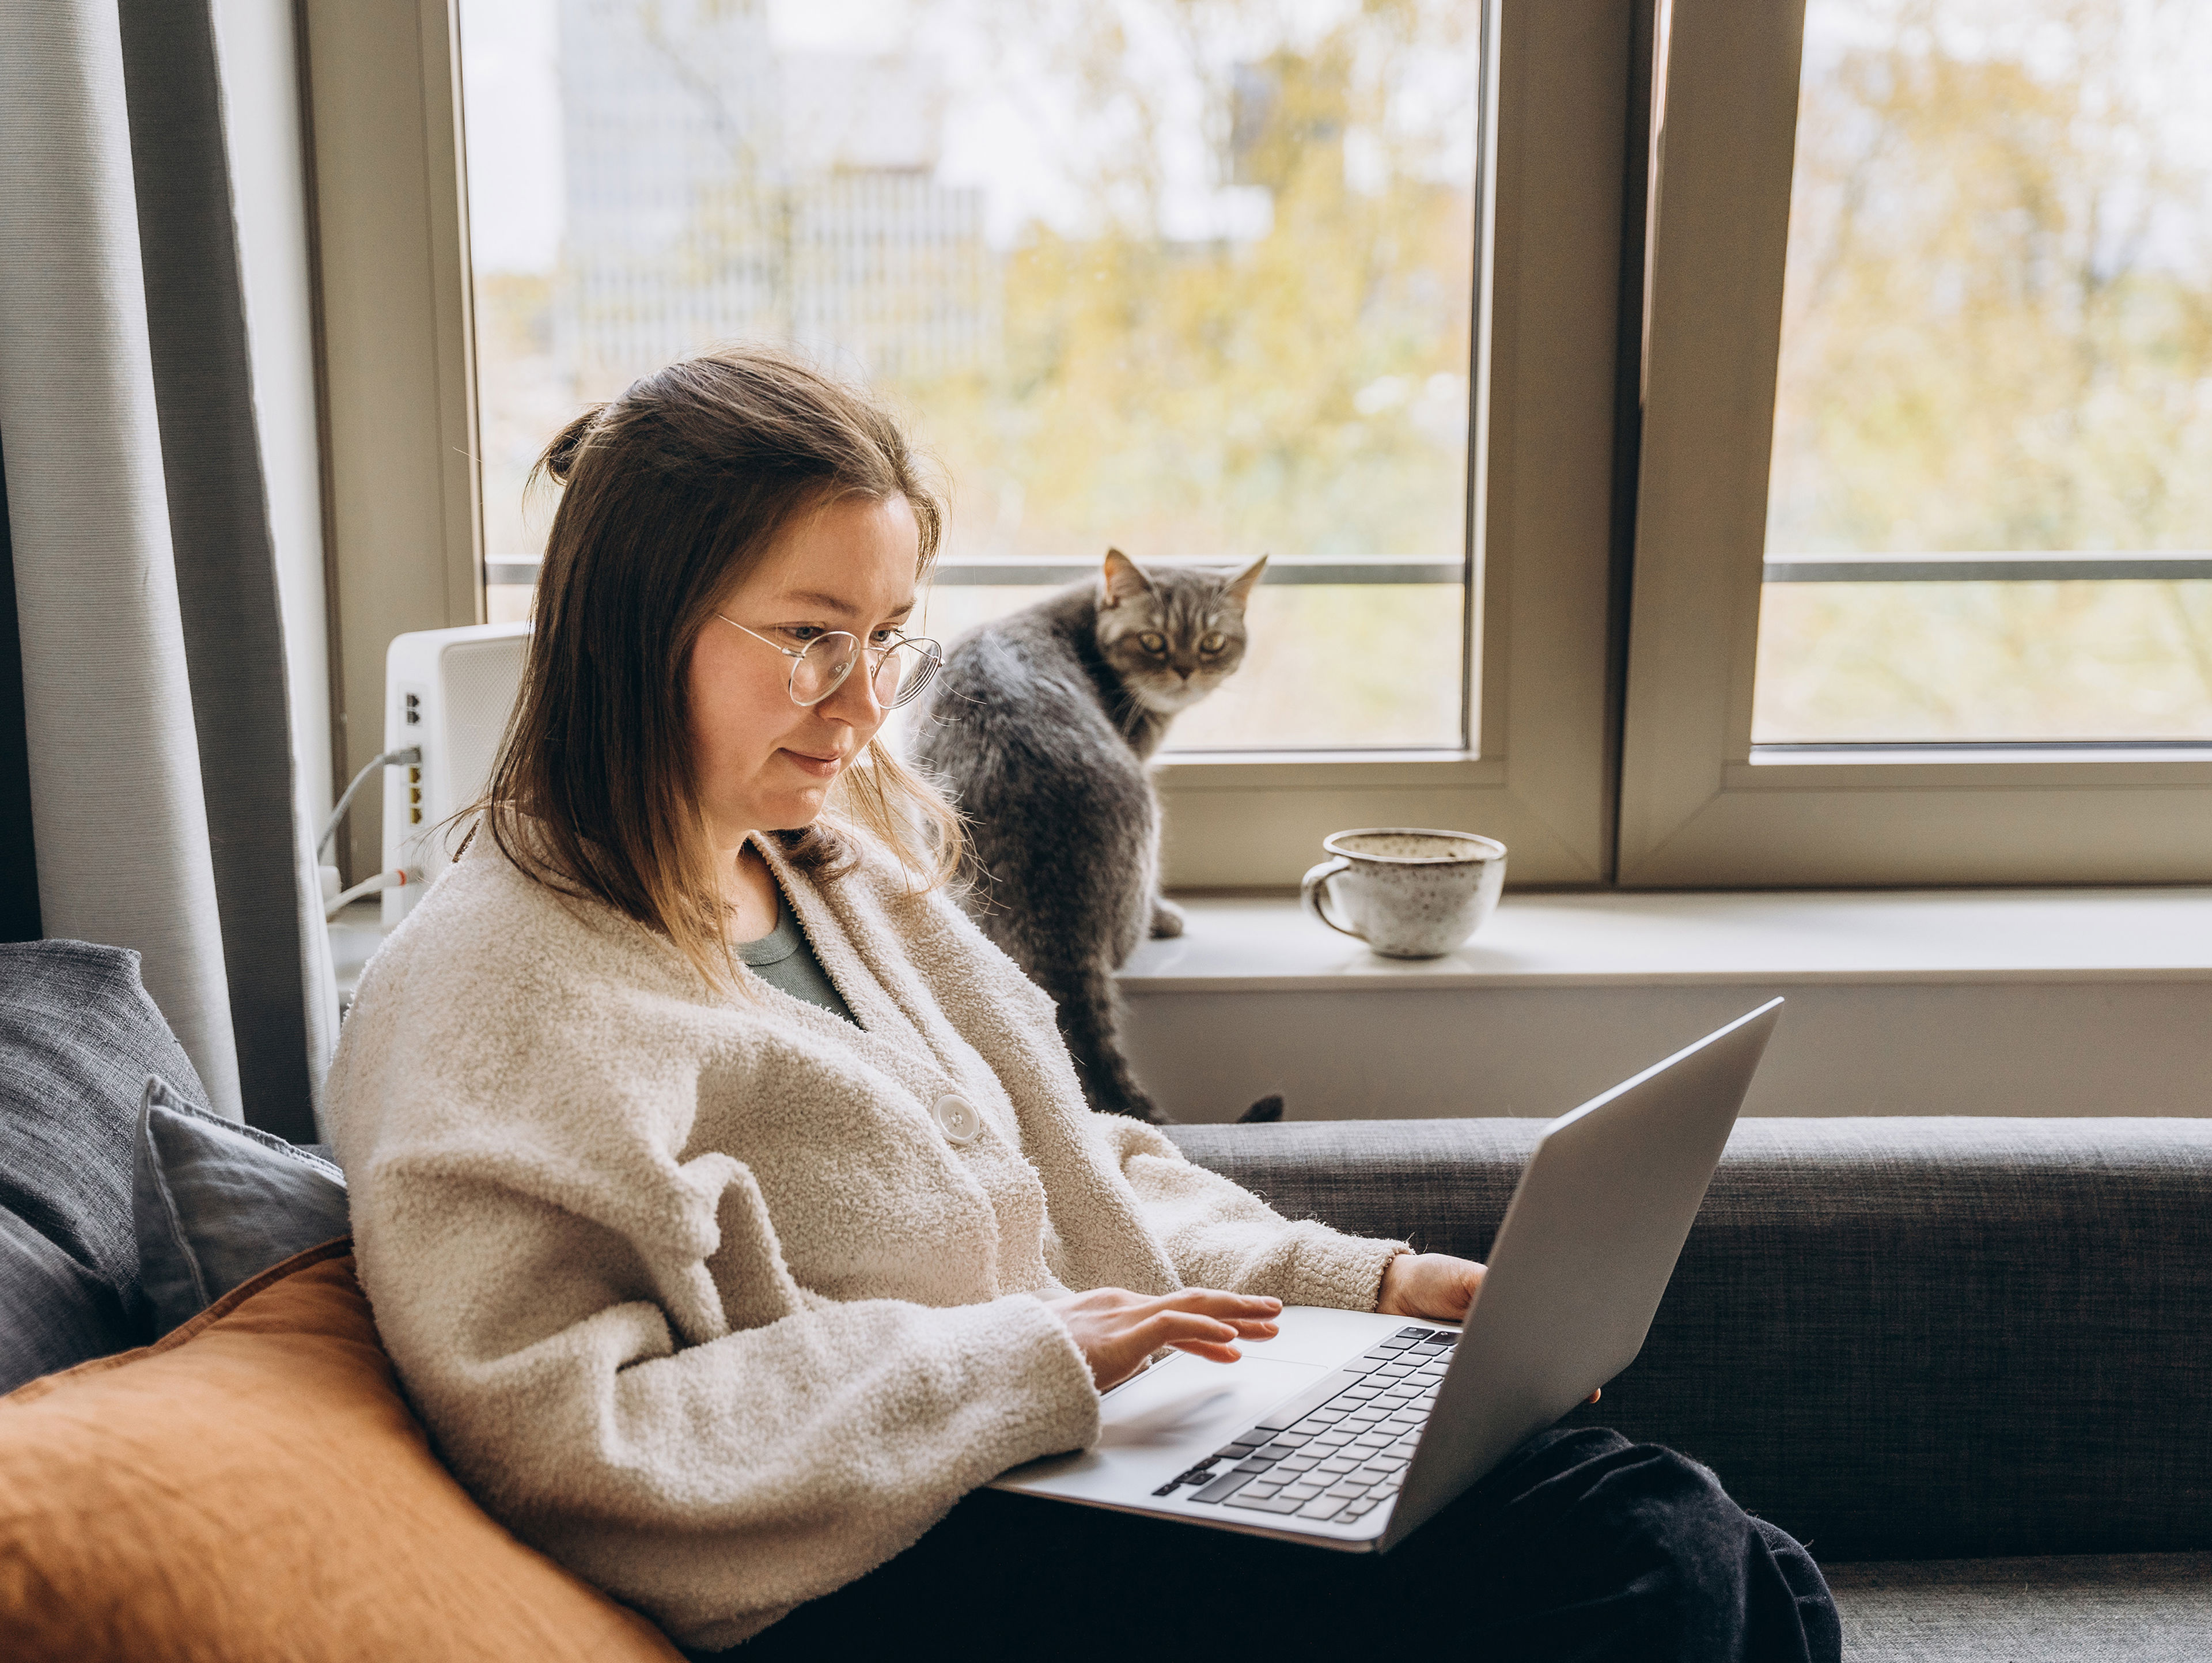 Young Woman Working At Home Remotely Using A Laptop